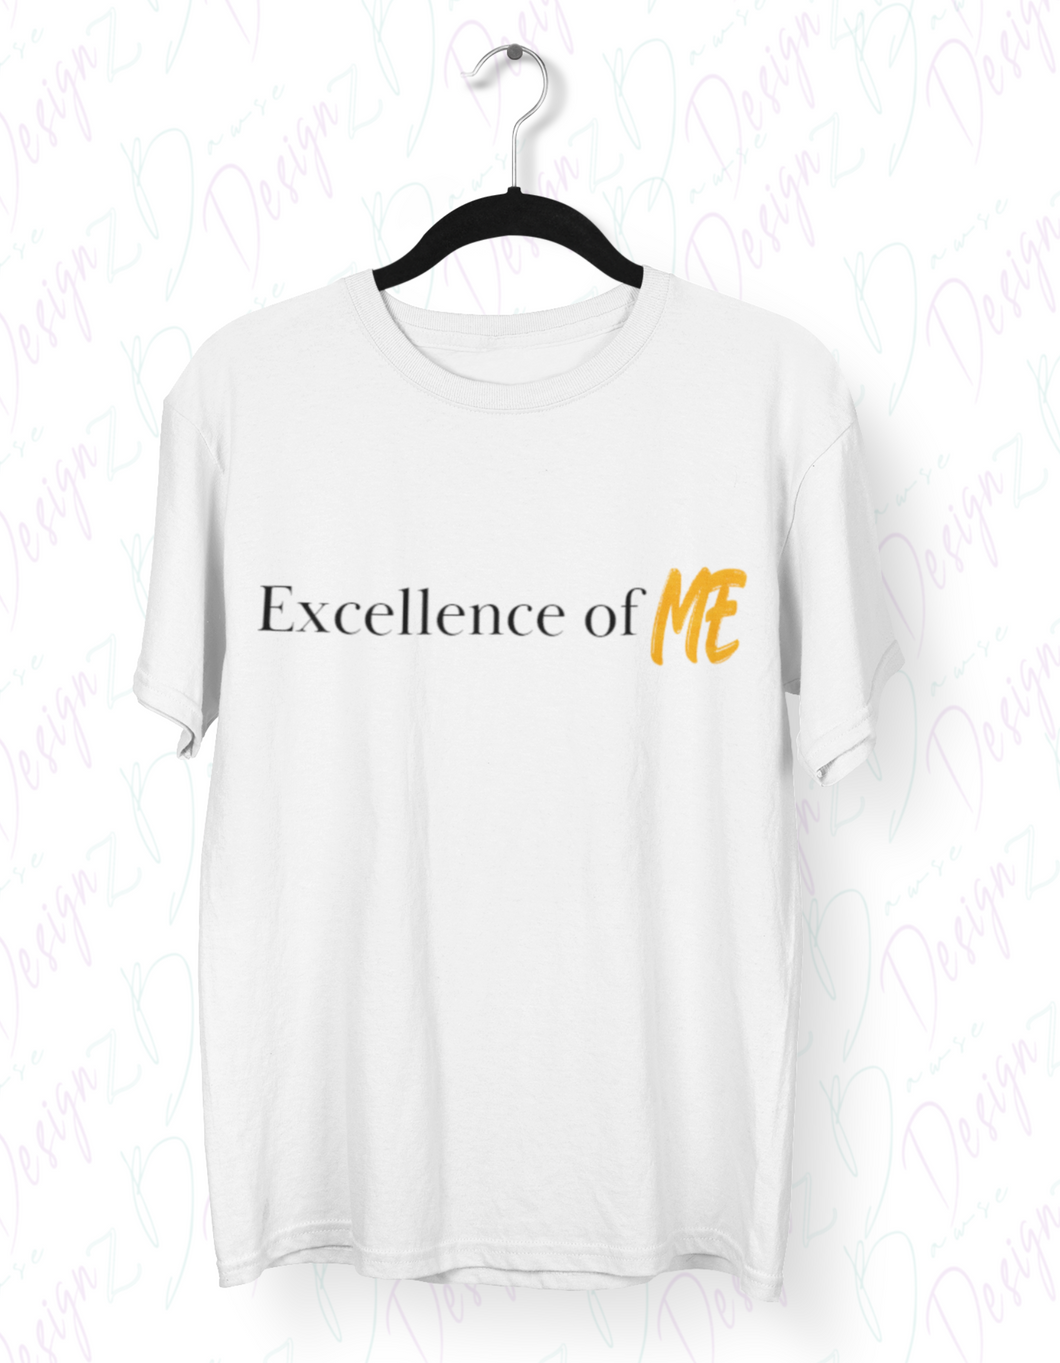 Excellence of ME Shirt